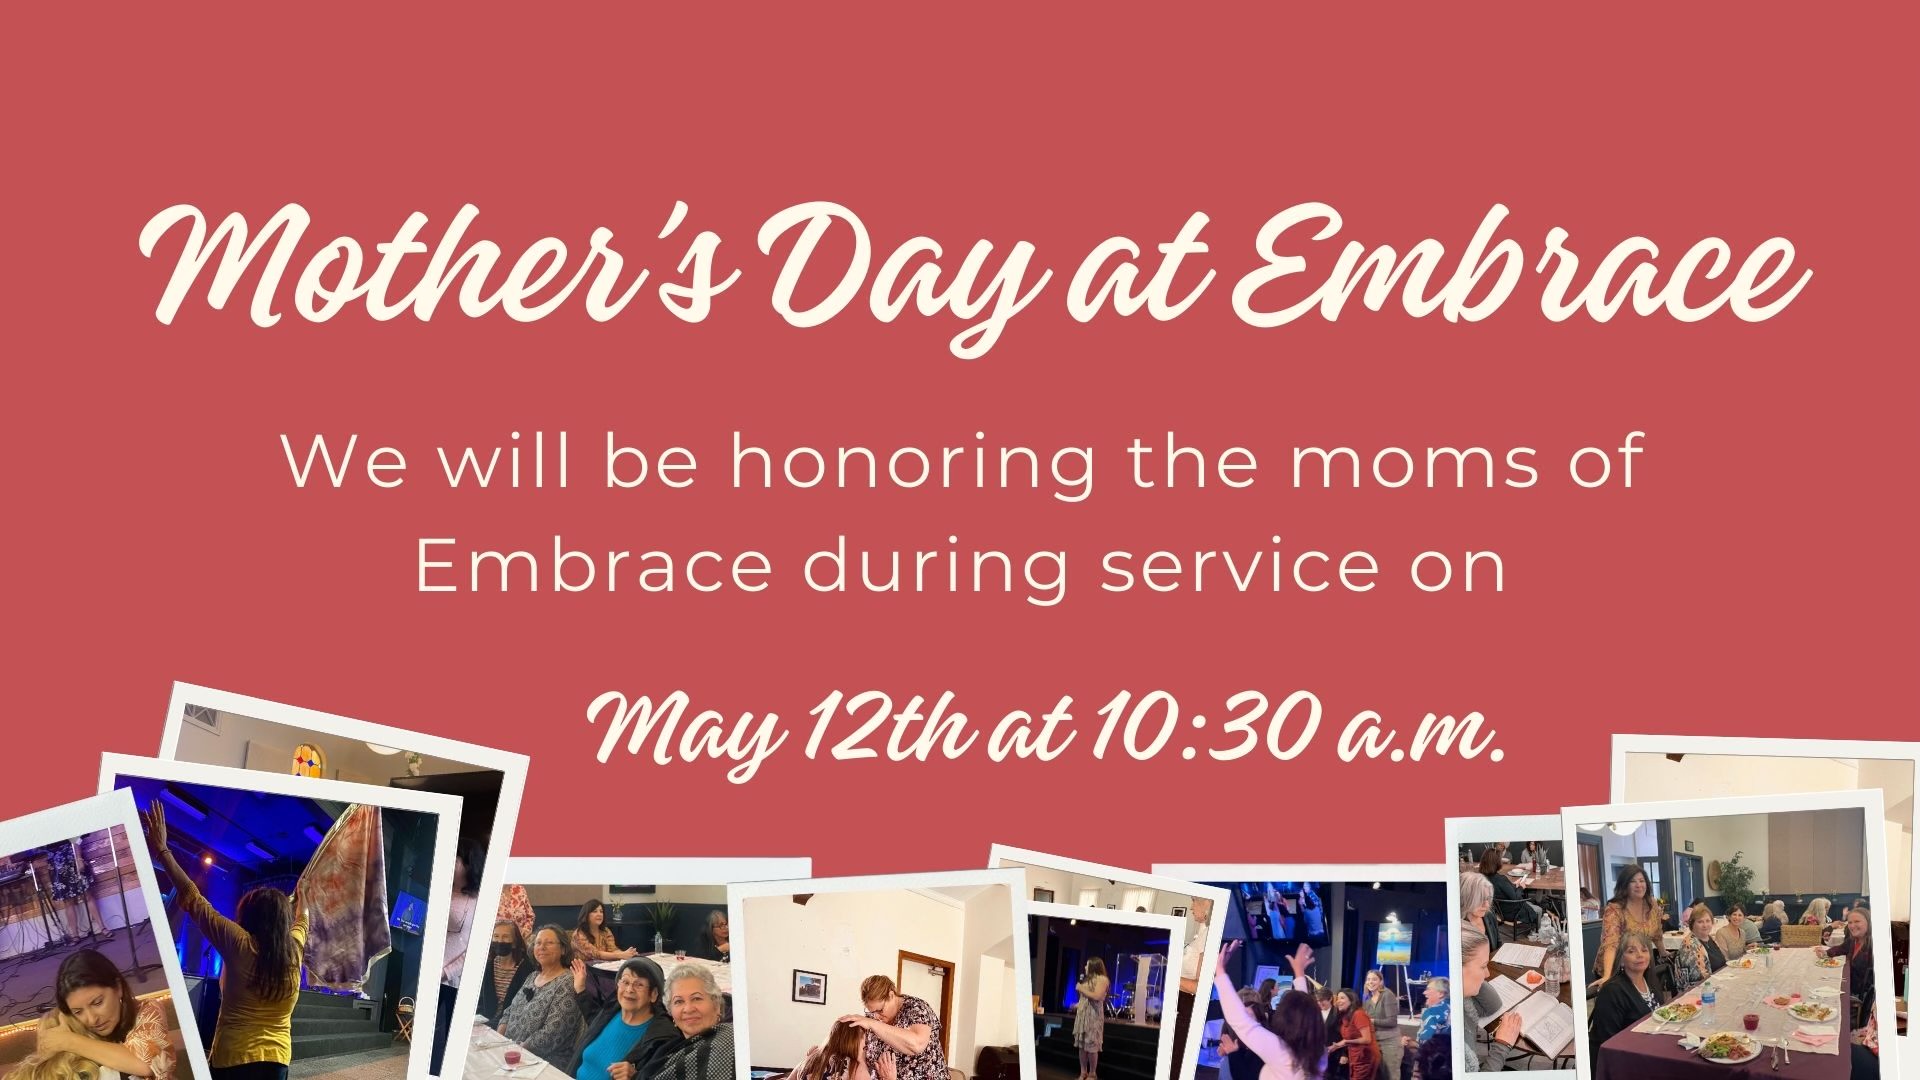 Mother’s Day at Embrace May 12th